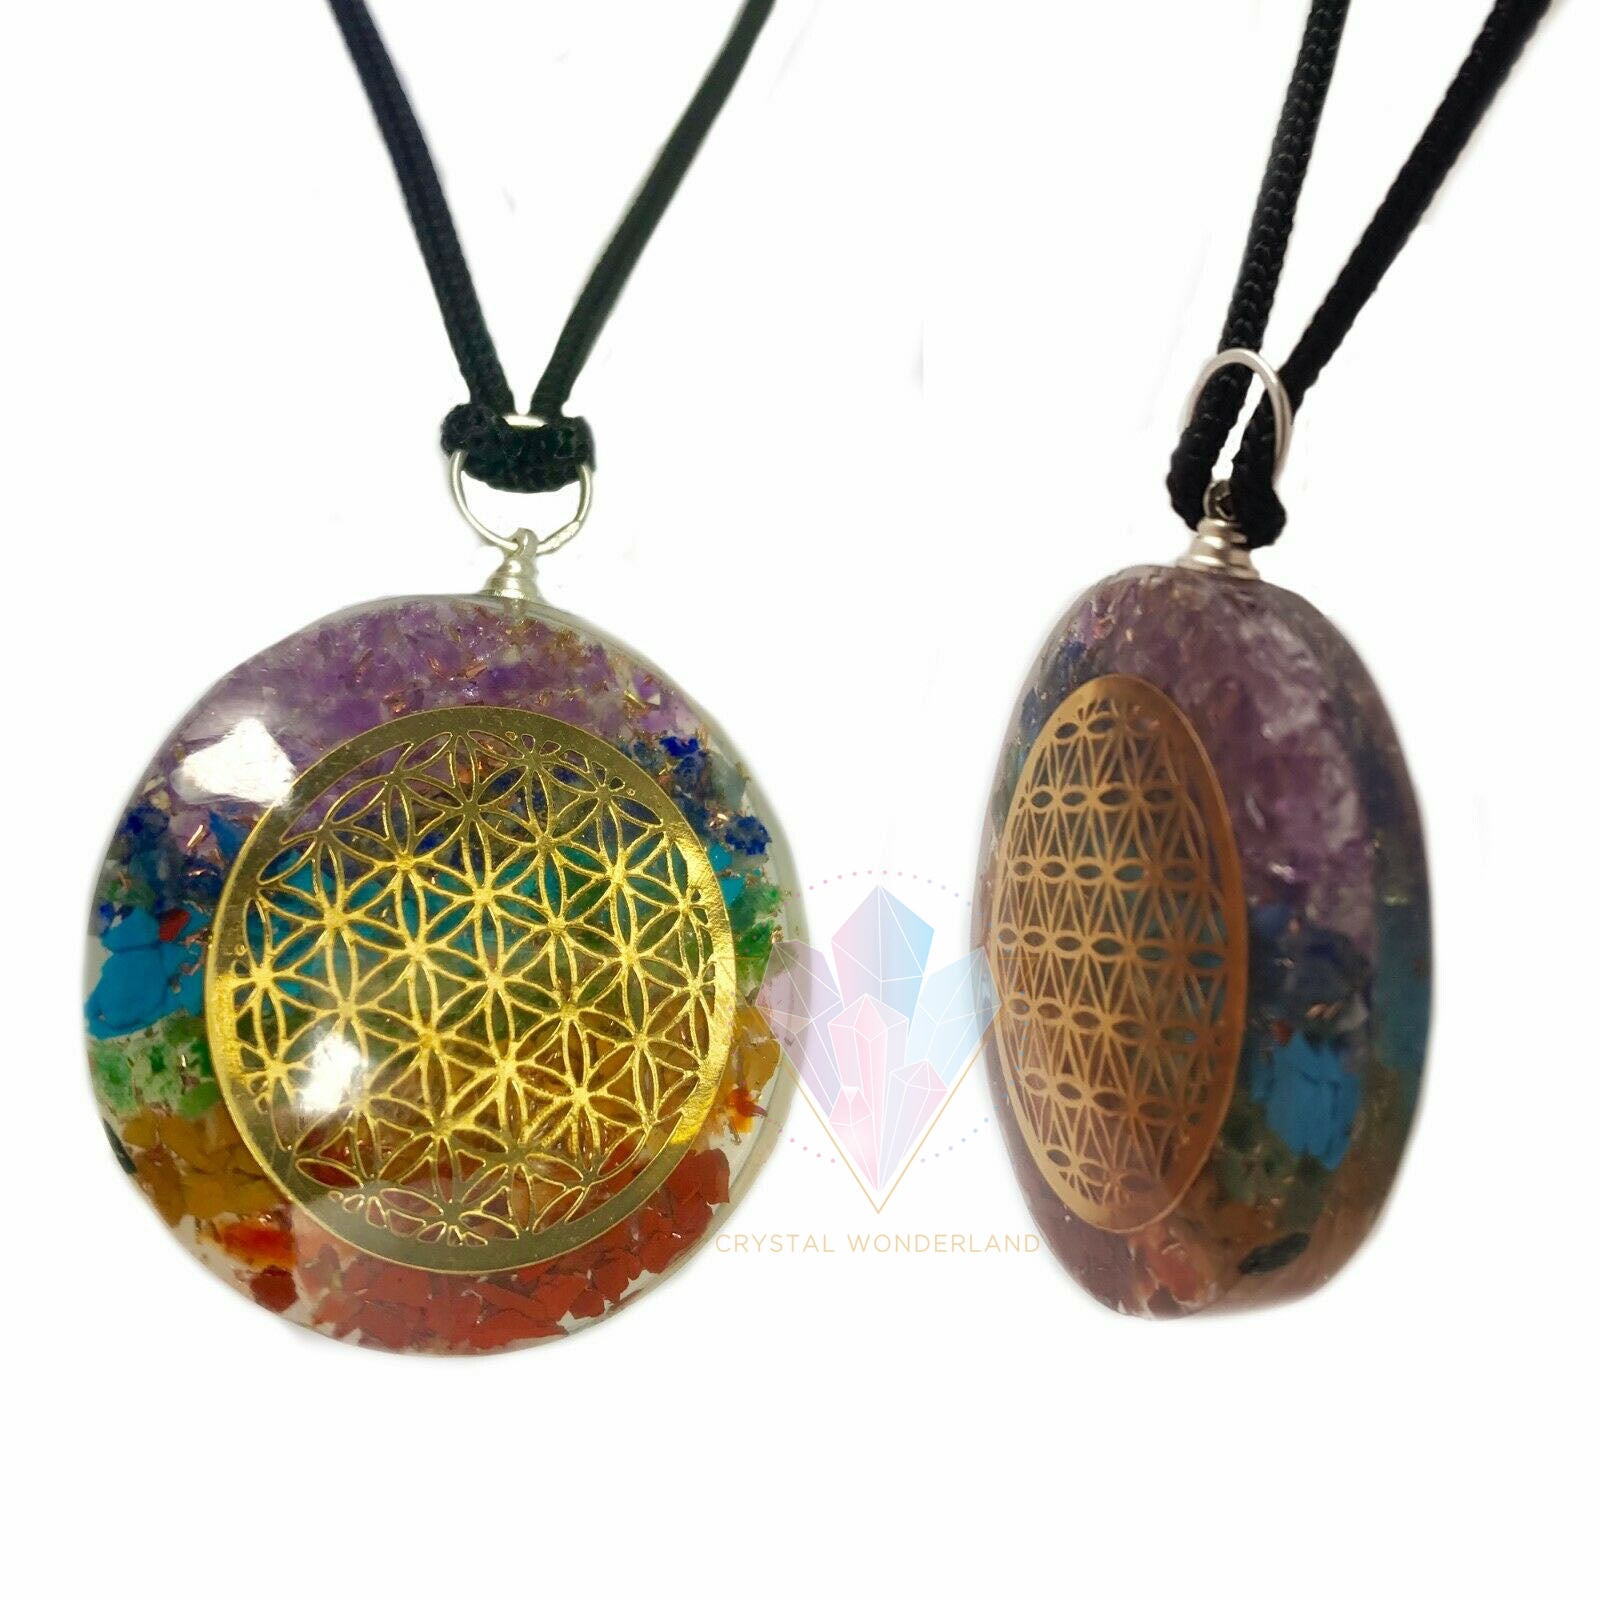 7 Chakras Flower of Life Orgonite Necklace Pendant Adjustable Cord